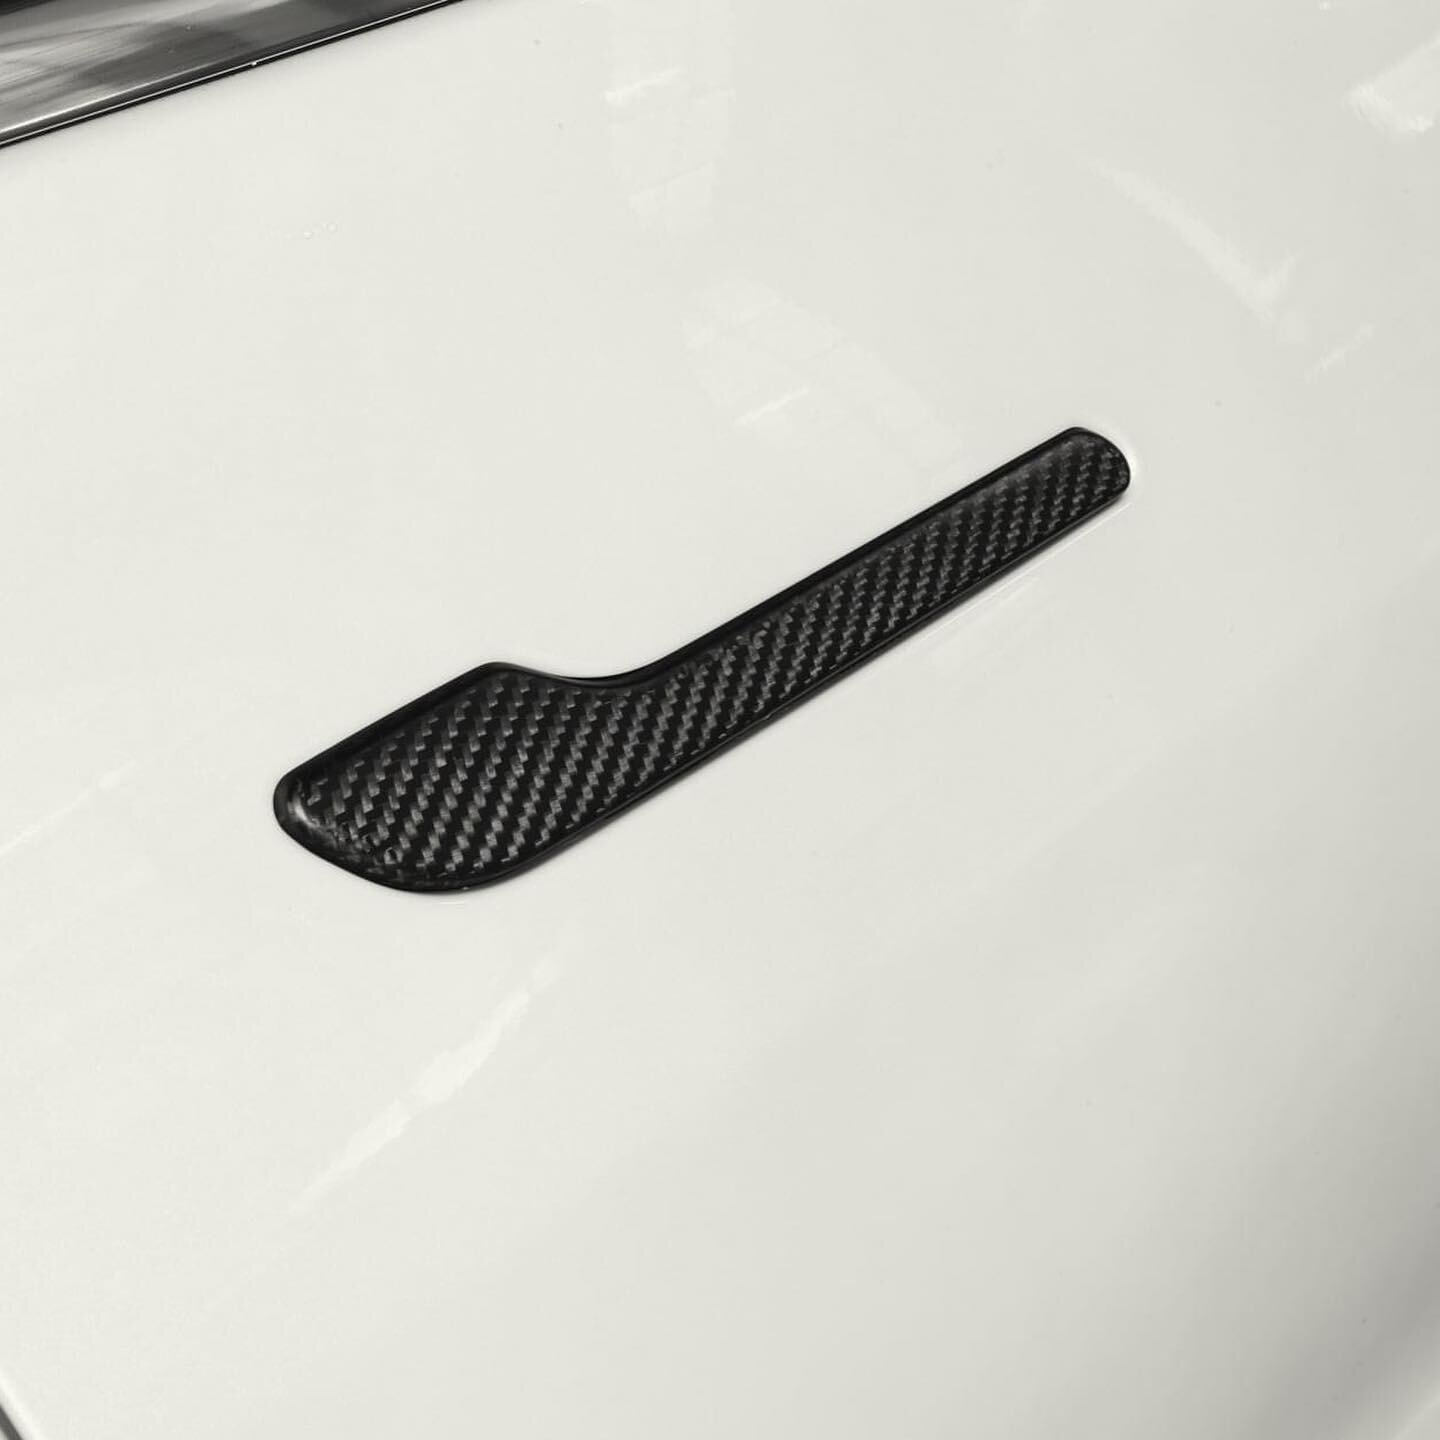 As you approach your Model 3 and set off on a journey, think of the two main touch points. How nice would it be to touch real carbon fibre each time. Check out our TRU Carbon range to give your Tesla that personal touch. #teslauk #teslamodel3 #model3